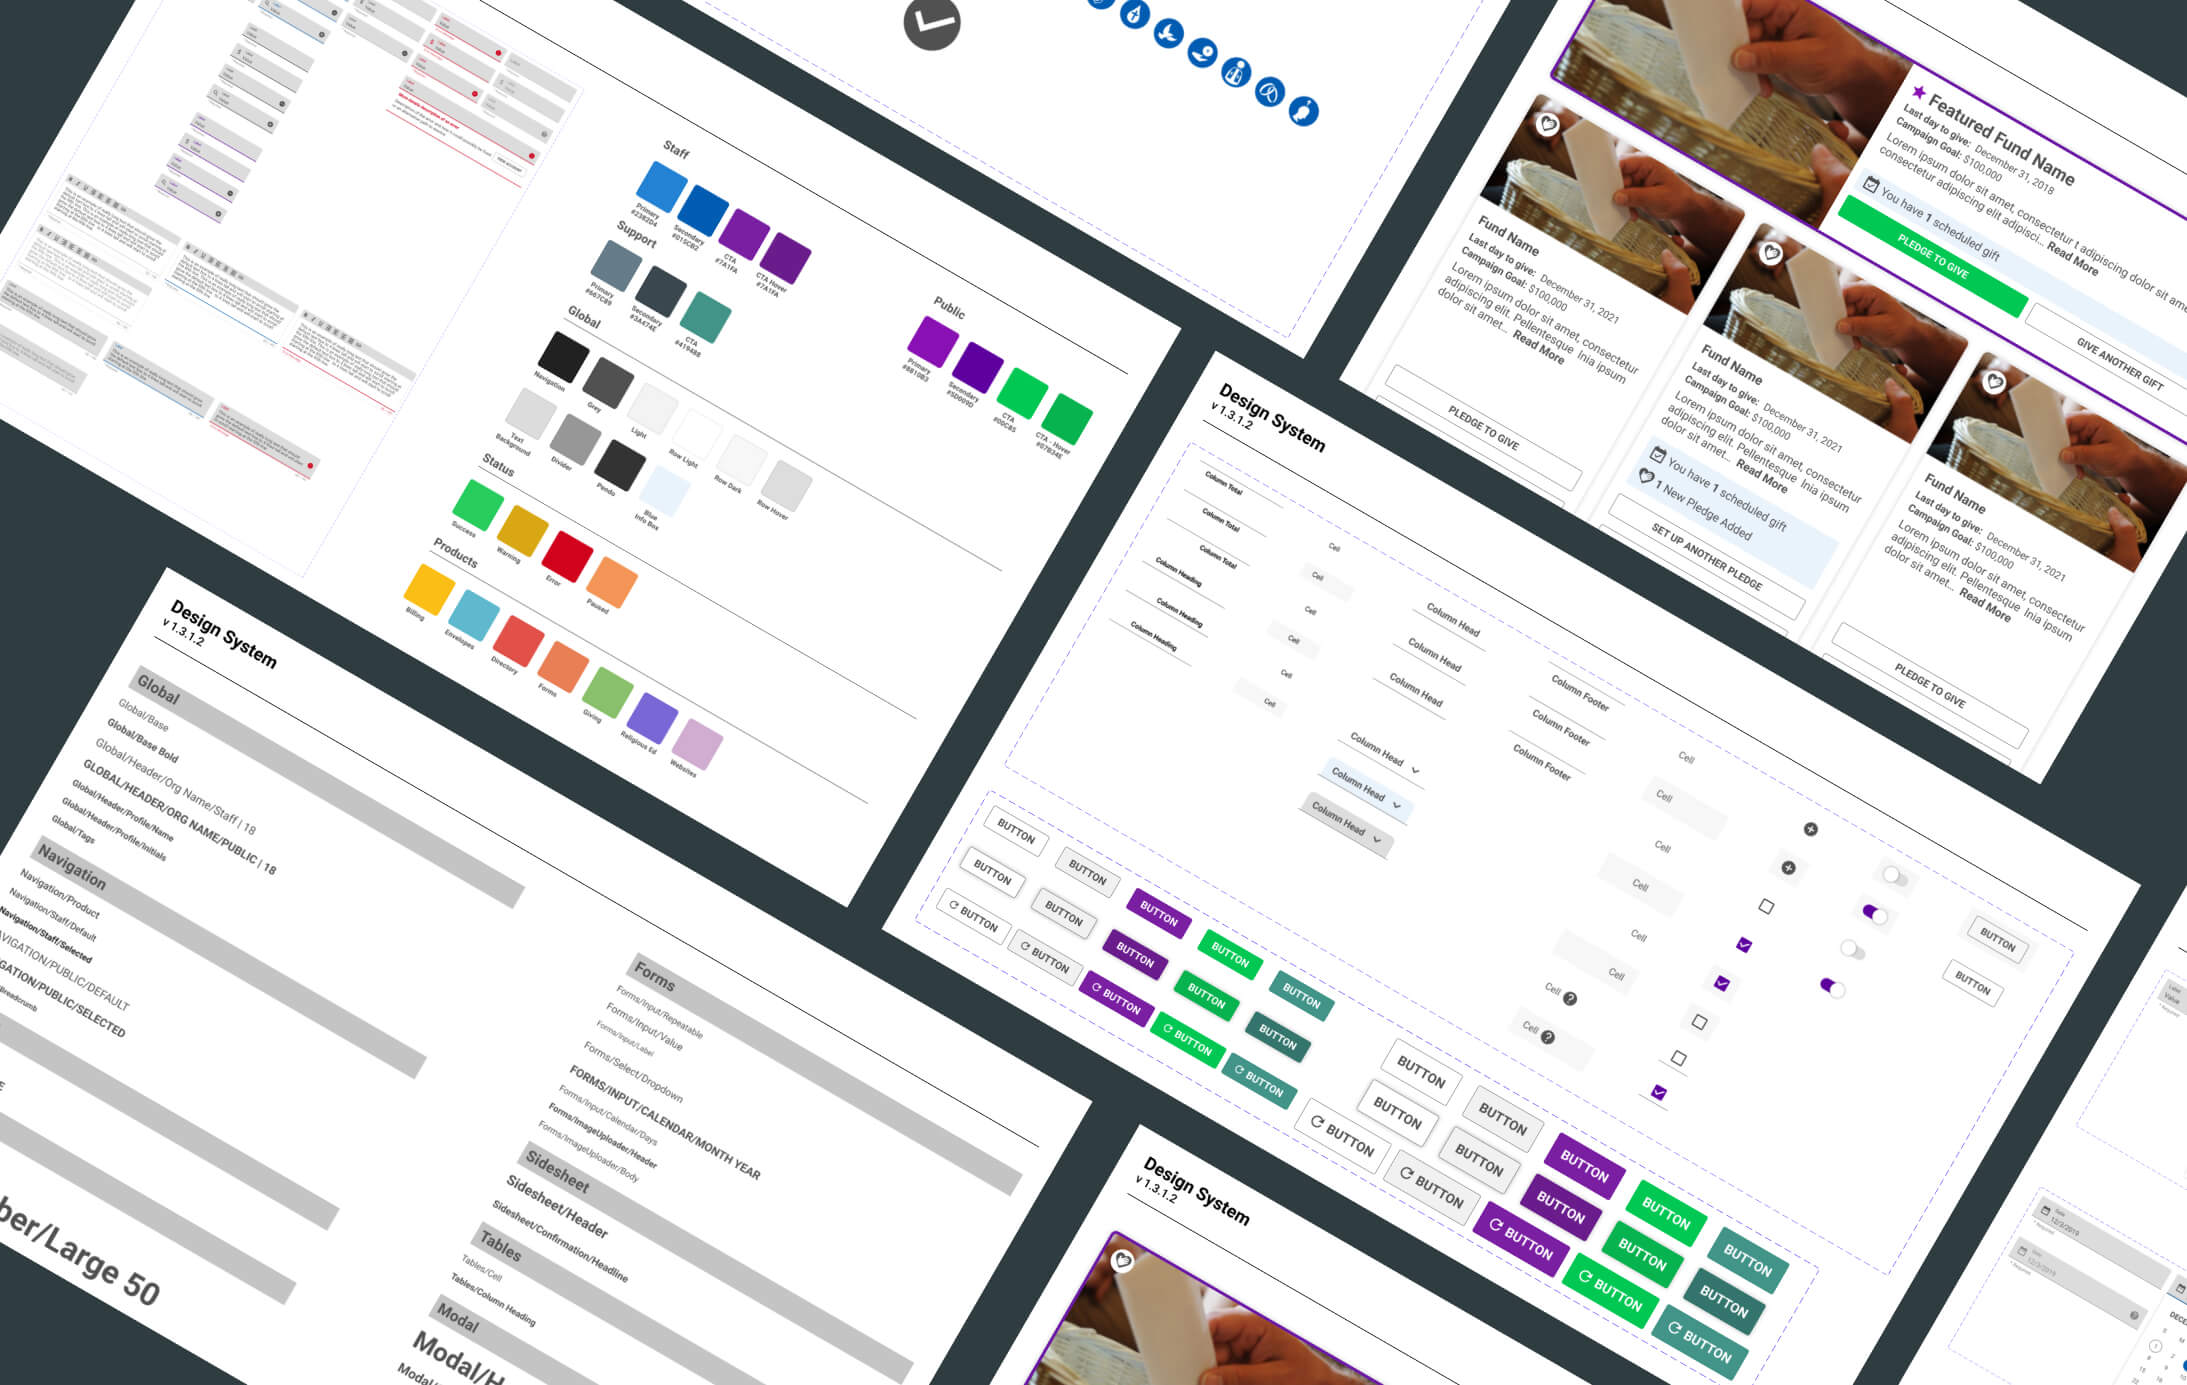 Collage of design system interface screens